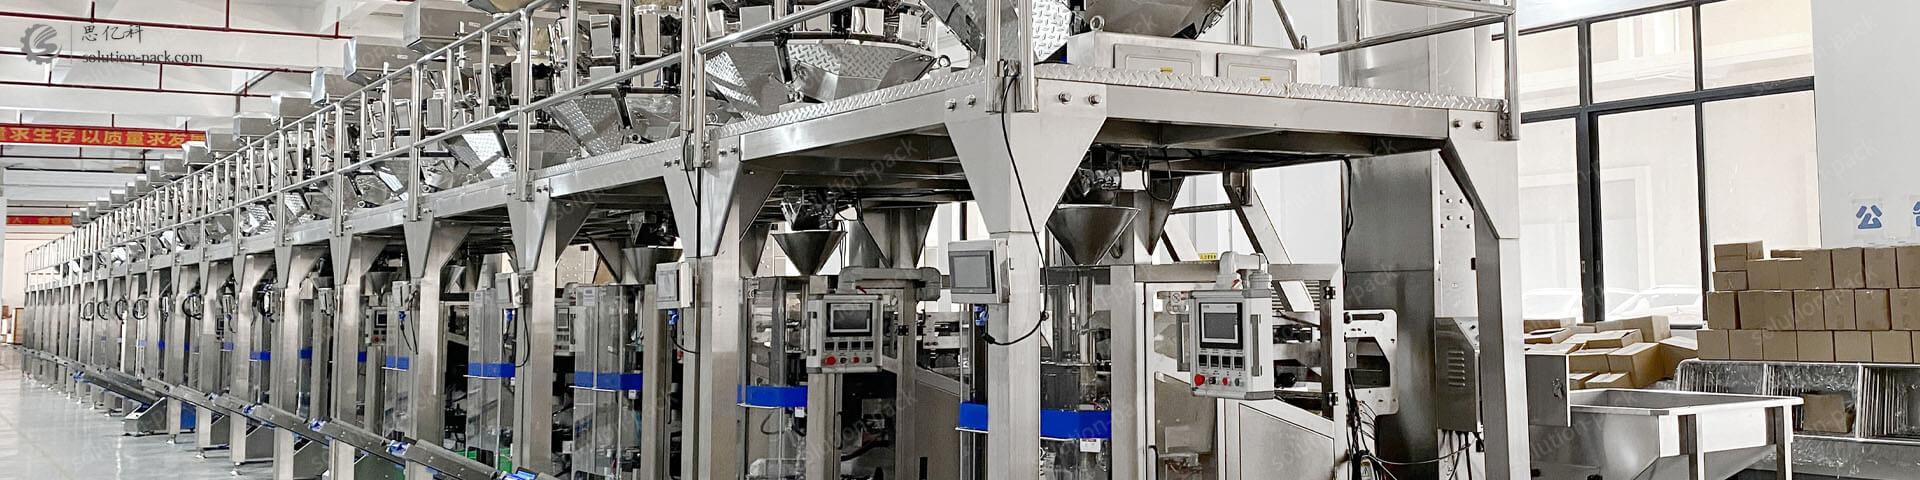 Solution-Pack | Automatic Refined Sugar Packing Machine Solution | Automatic Vertical Form Fill Seal Packaging Machine | VFFS Machine